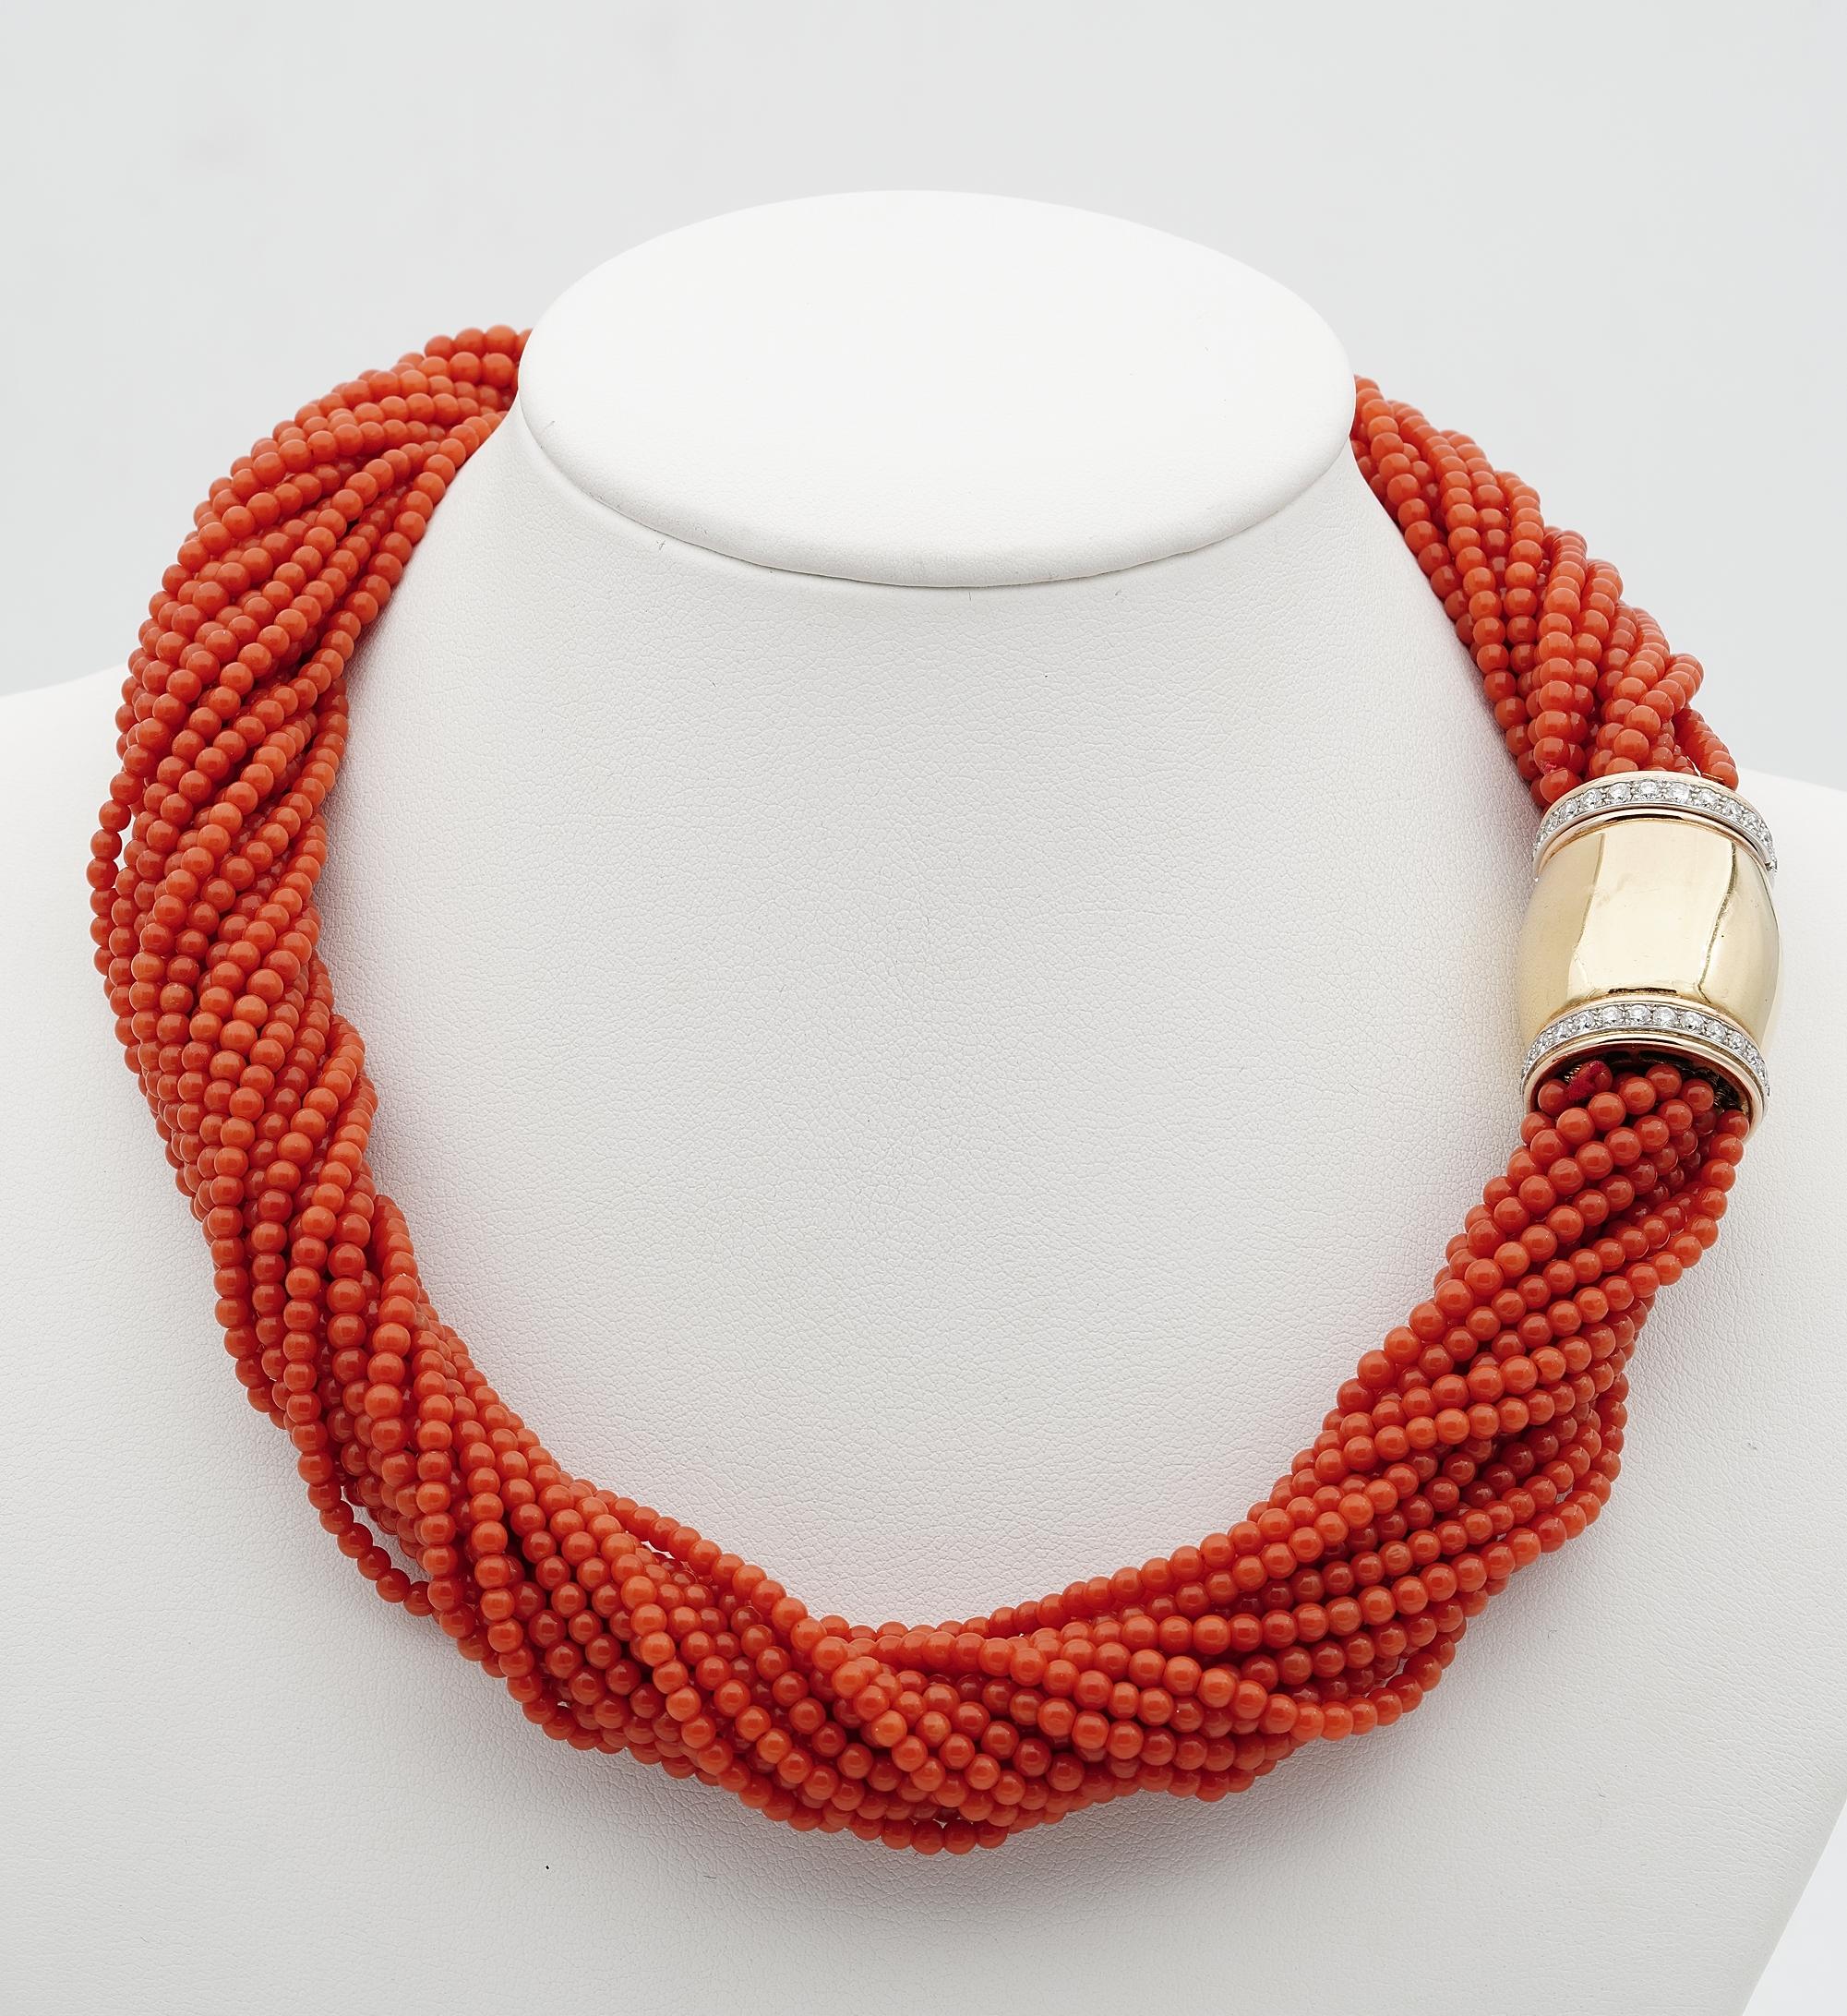 Allure of Coral
This captivating mid century necklace is Italian origin
Composed by 21 strands of highly selected, natural, untreated Coral of Red Salmon colour, 3 mm. beads all uniform, blemish free, matched to form this high quality vintage